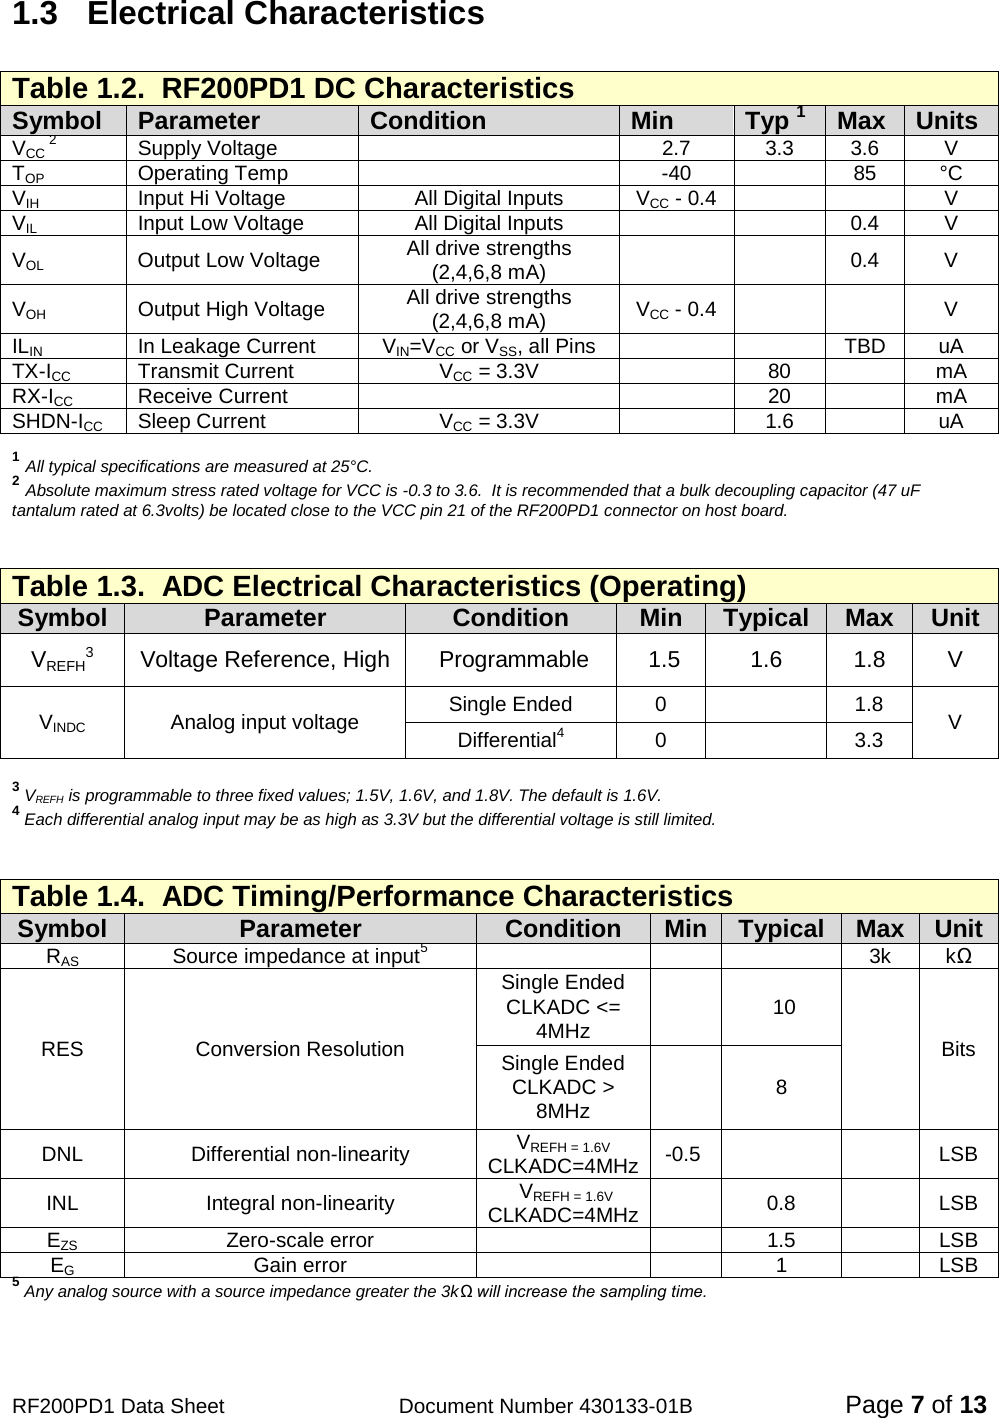                                            RF200PD1 Data Sheet                  Document Number 430133-01B  Page 7 of 13 1.3  Electrical Characteristics  Table 1.2.  RF200PD1 DC Characteristics Symbol Parameter Condition Min Typ 1 Max Units VCC 2 Supply Voltage  2.7 3.3 3.6 V TOP Operating Temp   -40  85 °C VIH Input Hi Voltage All Digital Inputs VCC - 0.4   V VIL Input Low Voltage All Digital Inputs   0.4 V VOL Output Low Voltage All drive strengths (2,4,6,8 mA)   0.4  V VOH Output High Voltage All drive strengths (2,4,6,8 mA) VCC - 0.4      V ILIN In Leakage Current VIN=VCC or VSS, all Pins   TBD uA TX-ICC  Transmit Current VCC = 3.3V  80  mA RX-ICC  Receive Current   20  mA SHDN-ICC Sleep Current  VCC = 3.3V  1.6  uA  1  All typical specifications are measured at 25°C. 2  Absolute maximum stress rated voltage for VCC is -0.3 to 3.6.  It is recommended that a bulk decoupling capacitor (47 uF tantalum rated at 6.3volts) be located close to the VCC pin 21 of the RF200PD1 connector on host board.   Table 1.3.  ADC Electrical Characteristics (Operating) Symbol Parameter Condition Min Typical Max Unit VREFH3  Voltage Reference, High   Programmable   1.5 1.6 1.8  V VINDC Analog input voltage Single Ended  0    1.8 V Differential4  0    3.3  3 VREFH is programmable to three fixed values; 1.5V, 1.6V, and 1.8V. The default is 1.6V. 4 Each differential analog input may be as high as 3.3V but the differential voltage is still limited.   Table 1.4.  ADC Timing/Performance Characteristics Symbol Parameter Condition Min Typical Max Unit RAS Source impedance at input5       3k kΩ RES Conversion Resolution Single Ended CLKADC &lt;= 4MHz    10  Bits Single Ended CLKADC &gt; 8MHz   8 DNL Differential non-linearity VREFH = 1.6V  CLKADC=4MHz -0.5       LSB INL Integral non-linearity  VREFH = 1.6V  CLKADC=4MHz    0.8    LSB EZS Zero-scale error     1.5  LSB EG Gain error     1  LSB 5 Any analog source with a source impedance greater the 3kΩ will increase the sampling time.    